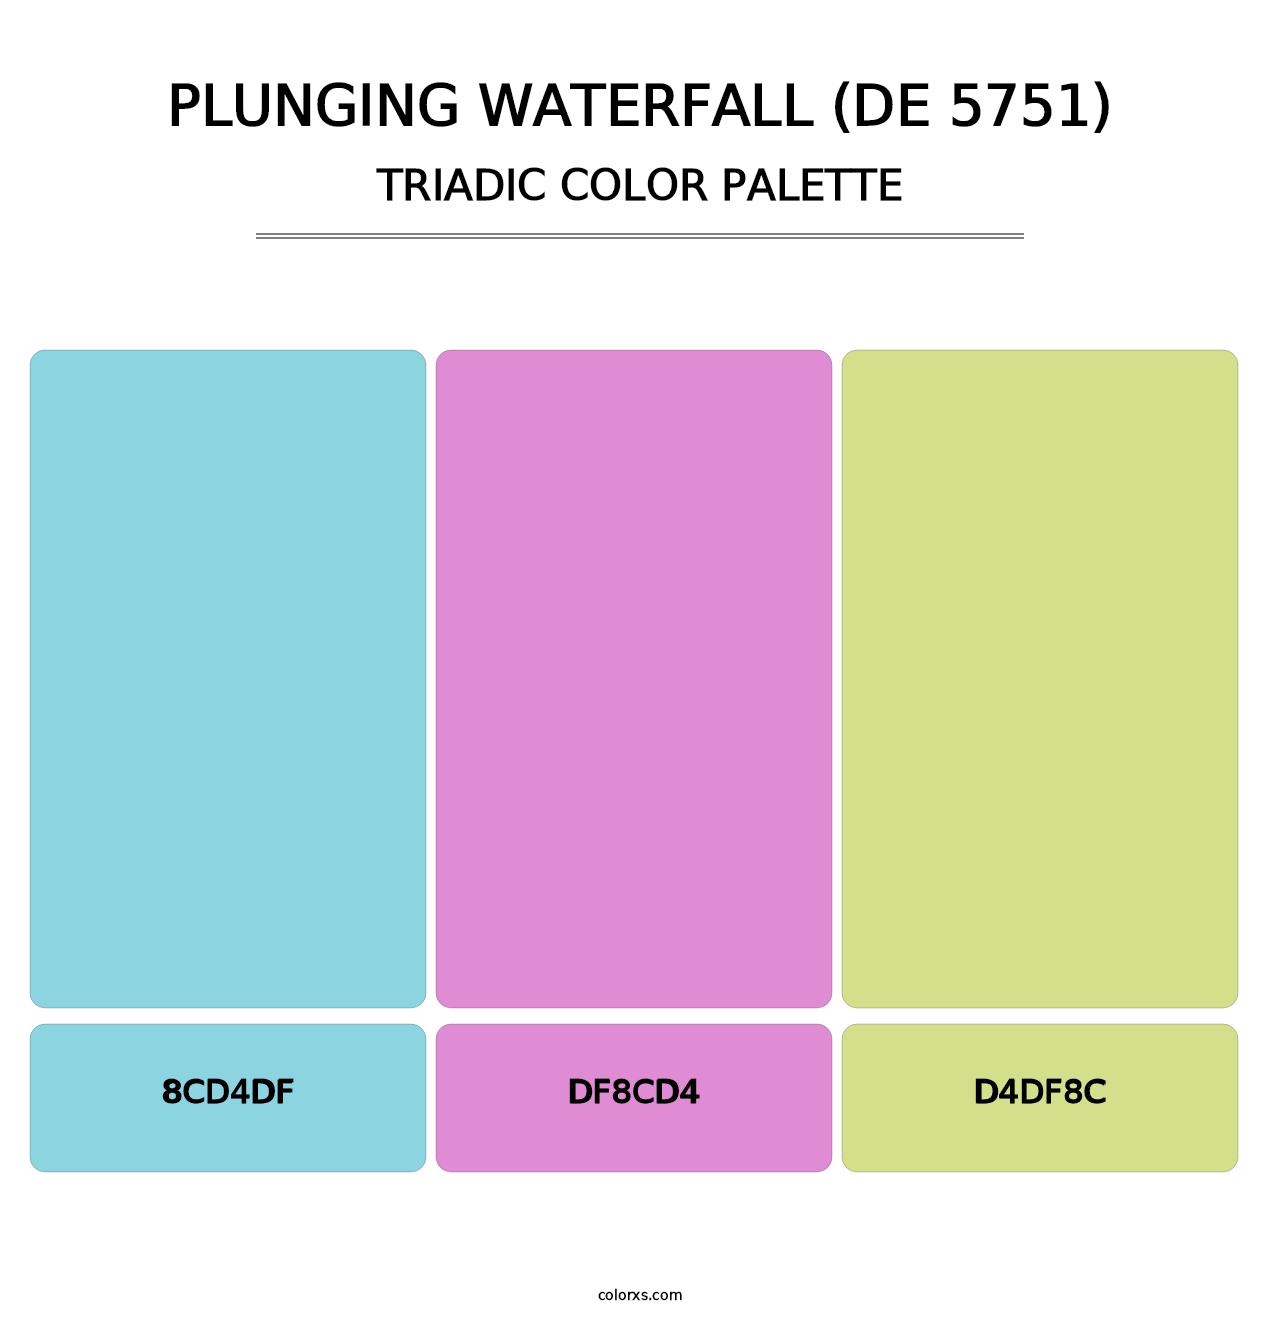 Plunging Waterfall (DE 5751) - Triadic Color Palette